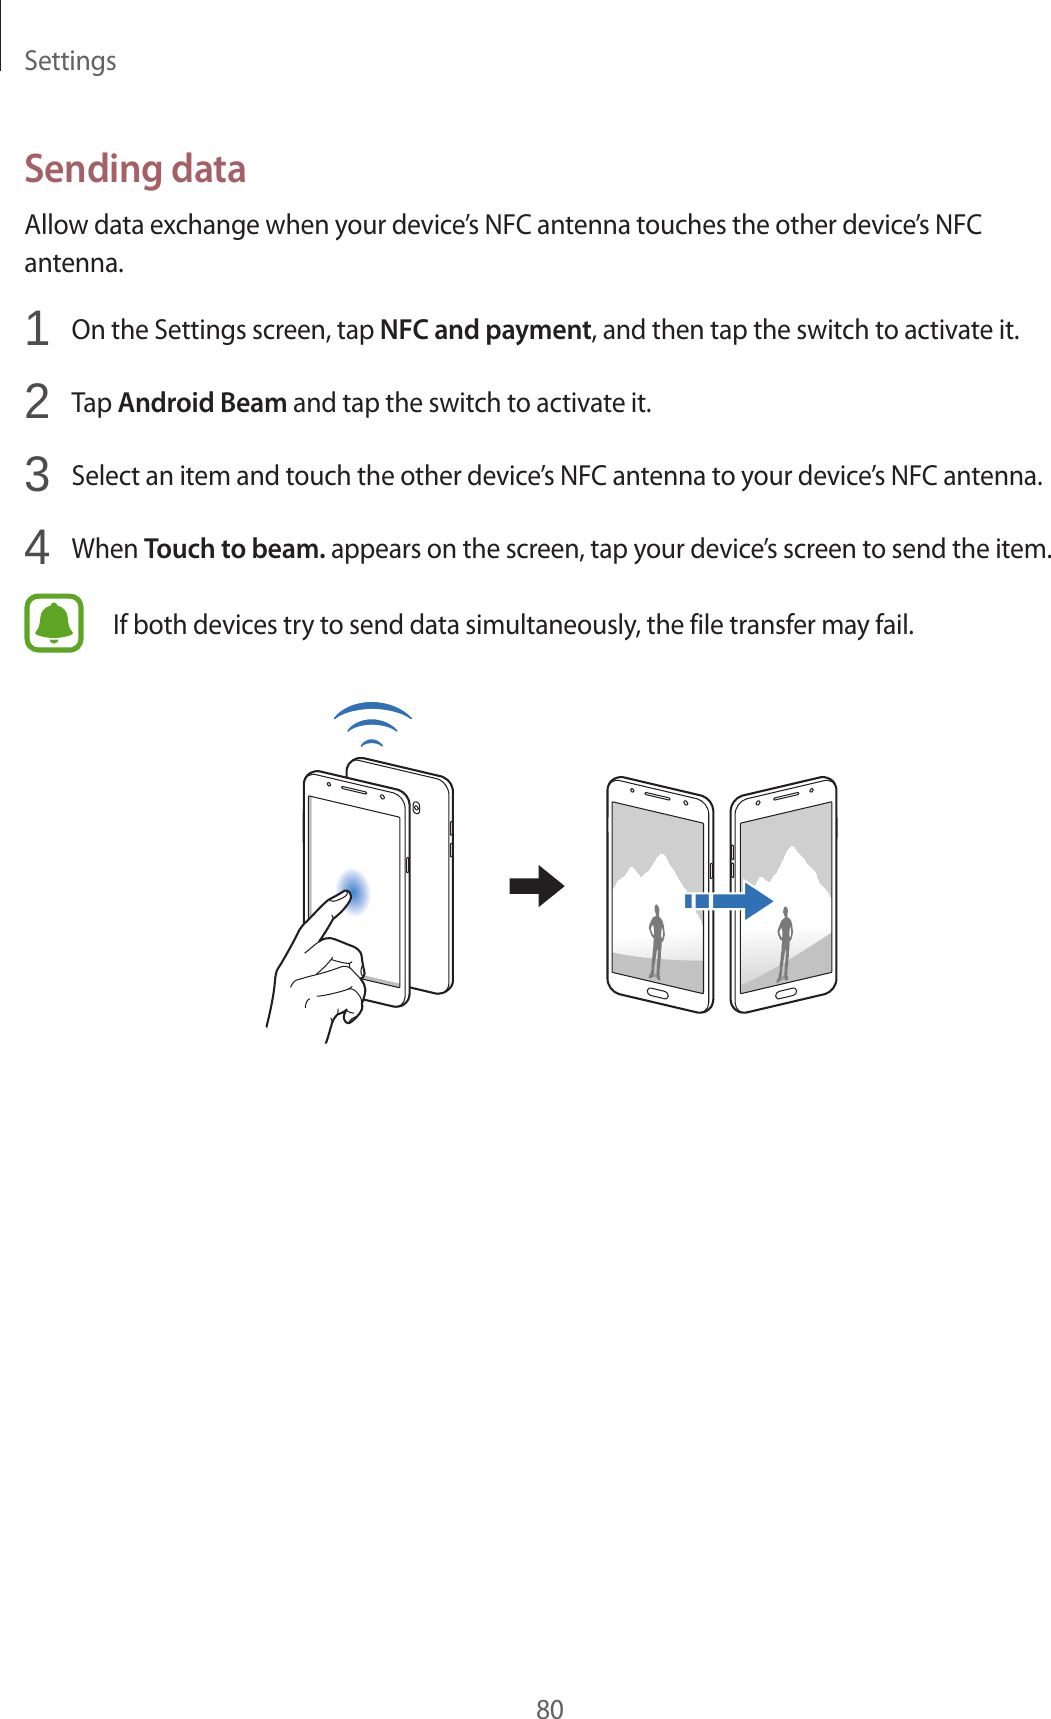 Settings80Sending dataAllow data exchange when your device’s NFC antenna touches the other device’s NFC antenna.1  On the Settings screen, tap NFC and payment, and then tap the switch to activate it.2  Tap Android Beam and tap the switch to activate it.3  Select an item and touch the other device’s NFC antenna to your device’s NFC antenna.4  When Touch to beam. appears on the screen, tap your device’s screen to send the item.If both devices try to send data simultaneously, the file transfer may fail.